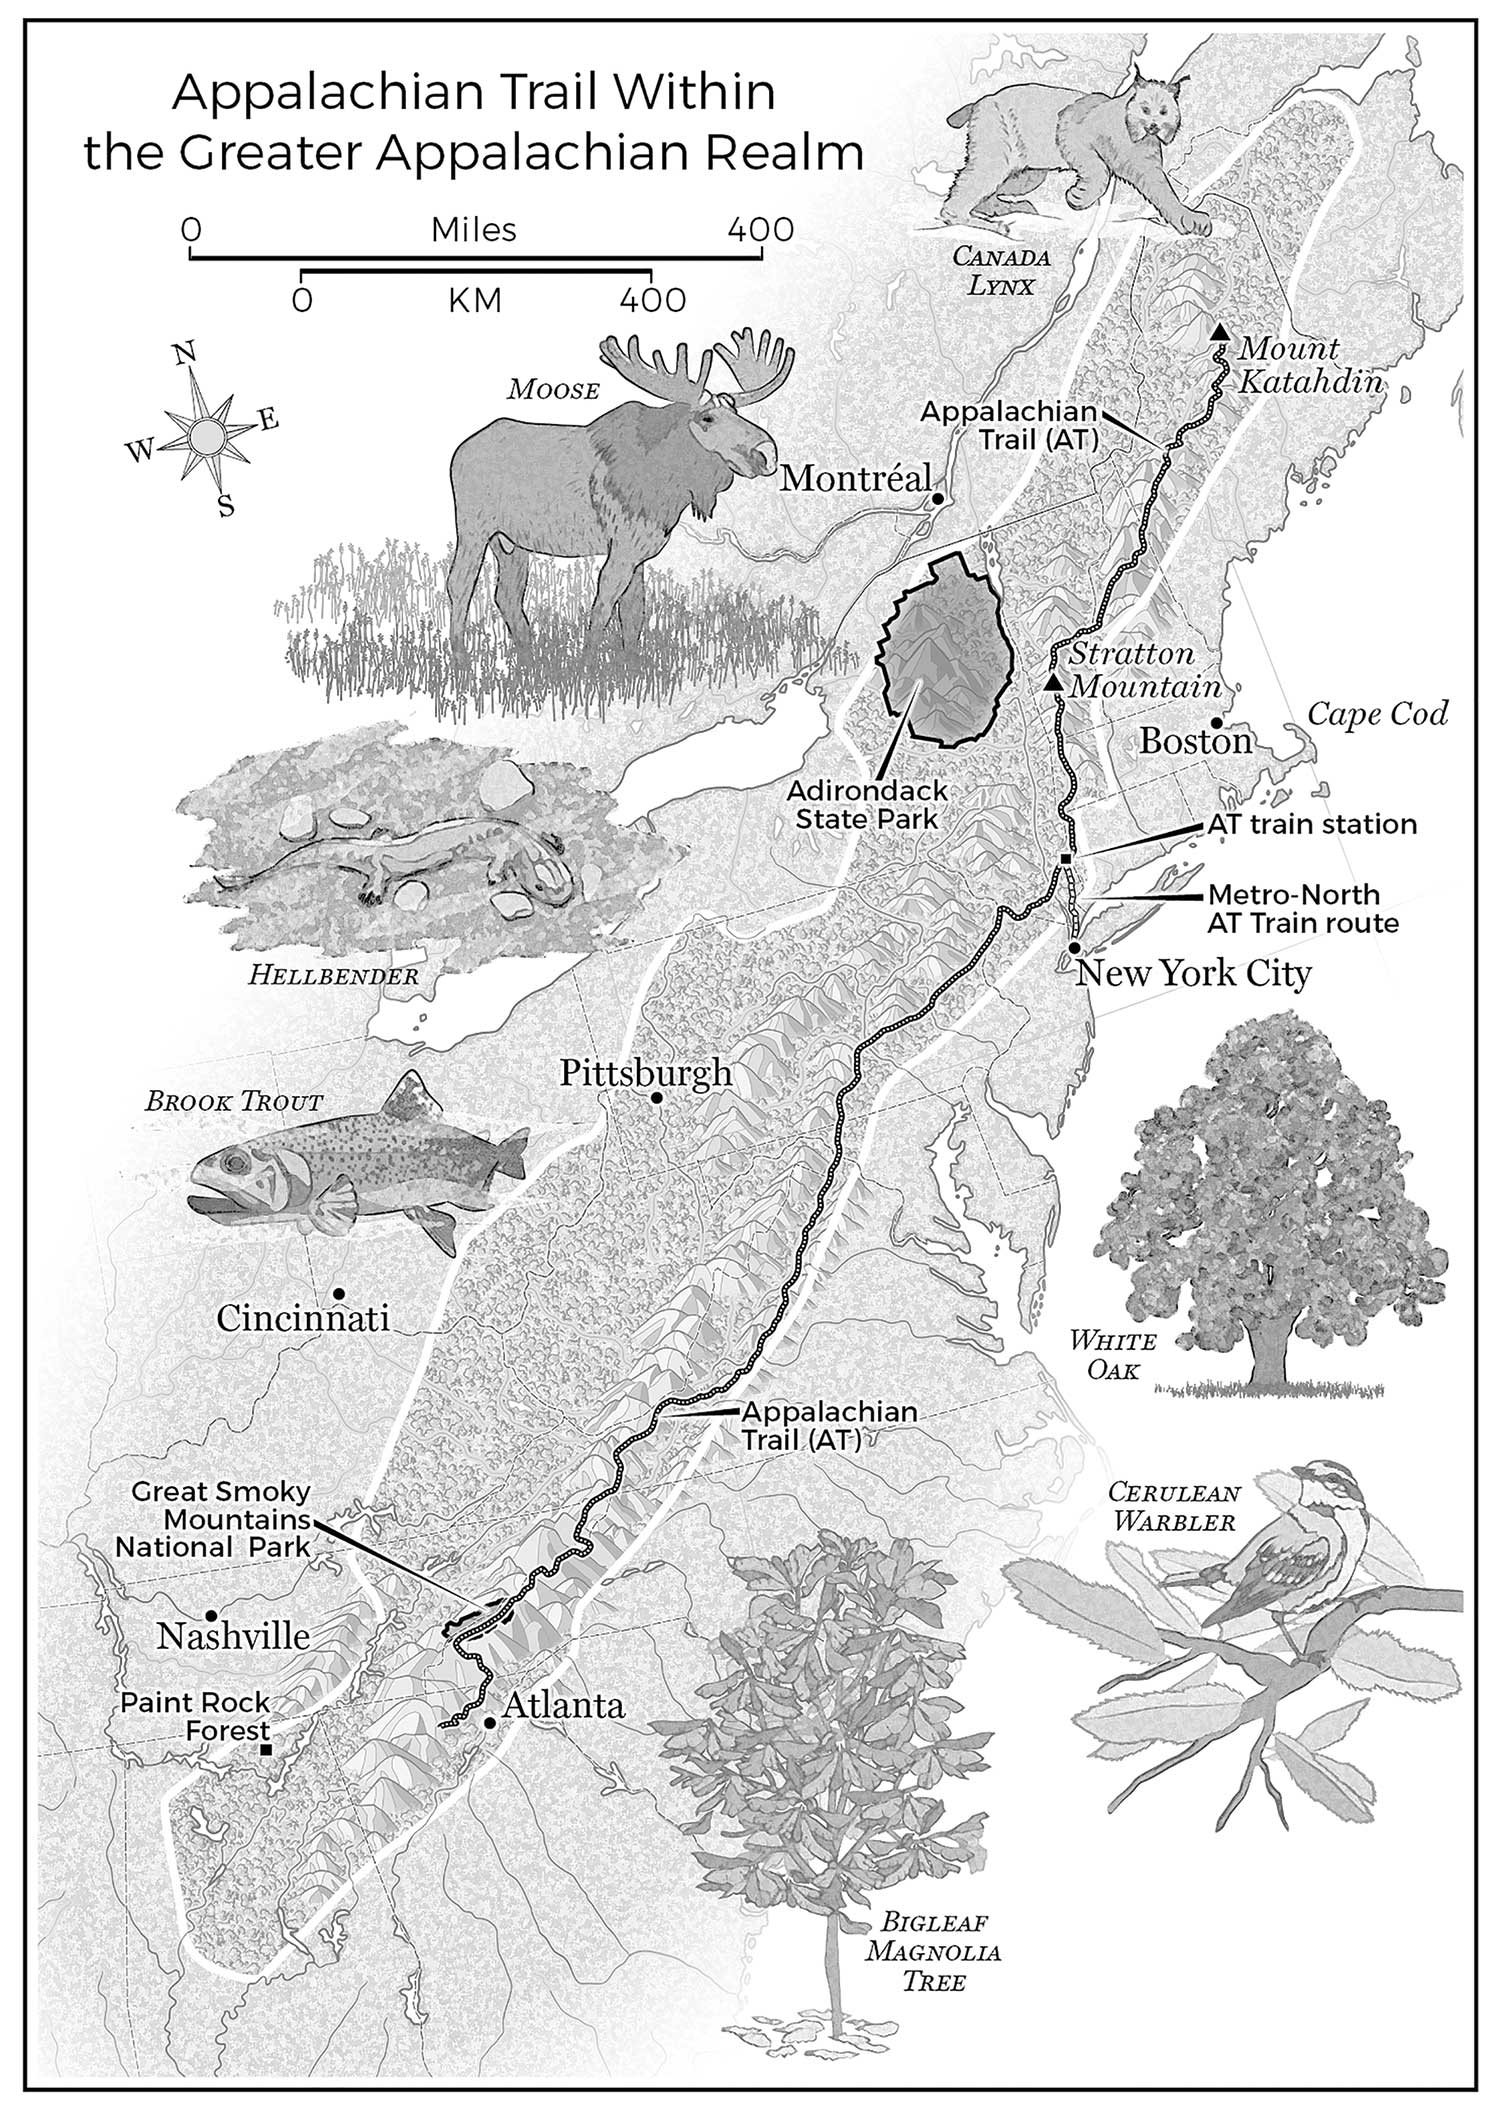 Appalachian Trail Within the Greater Appalachian Realm Map